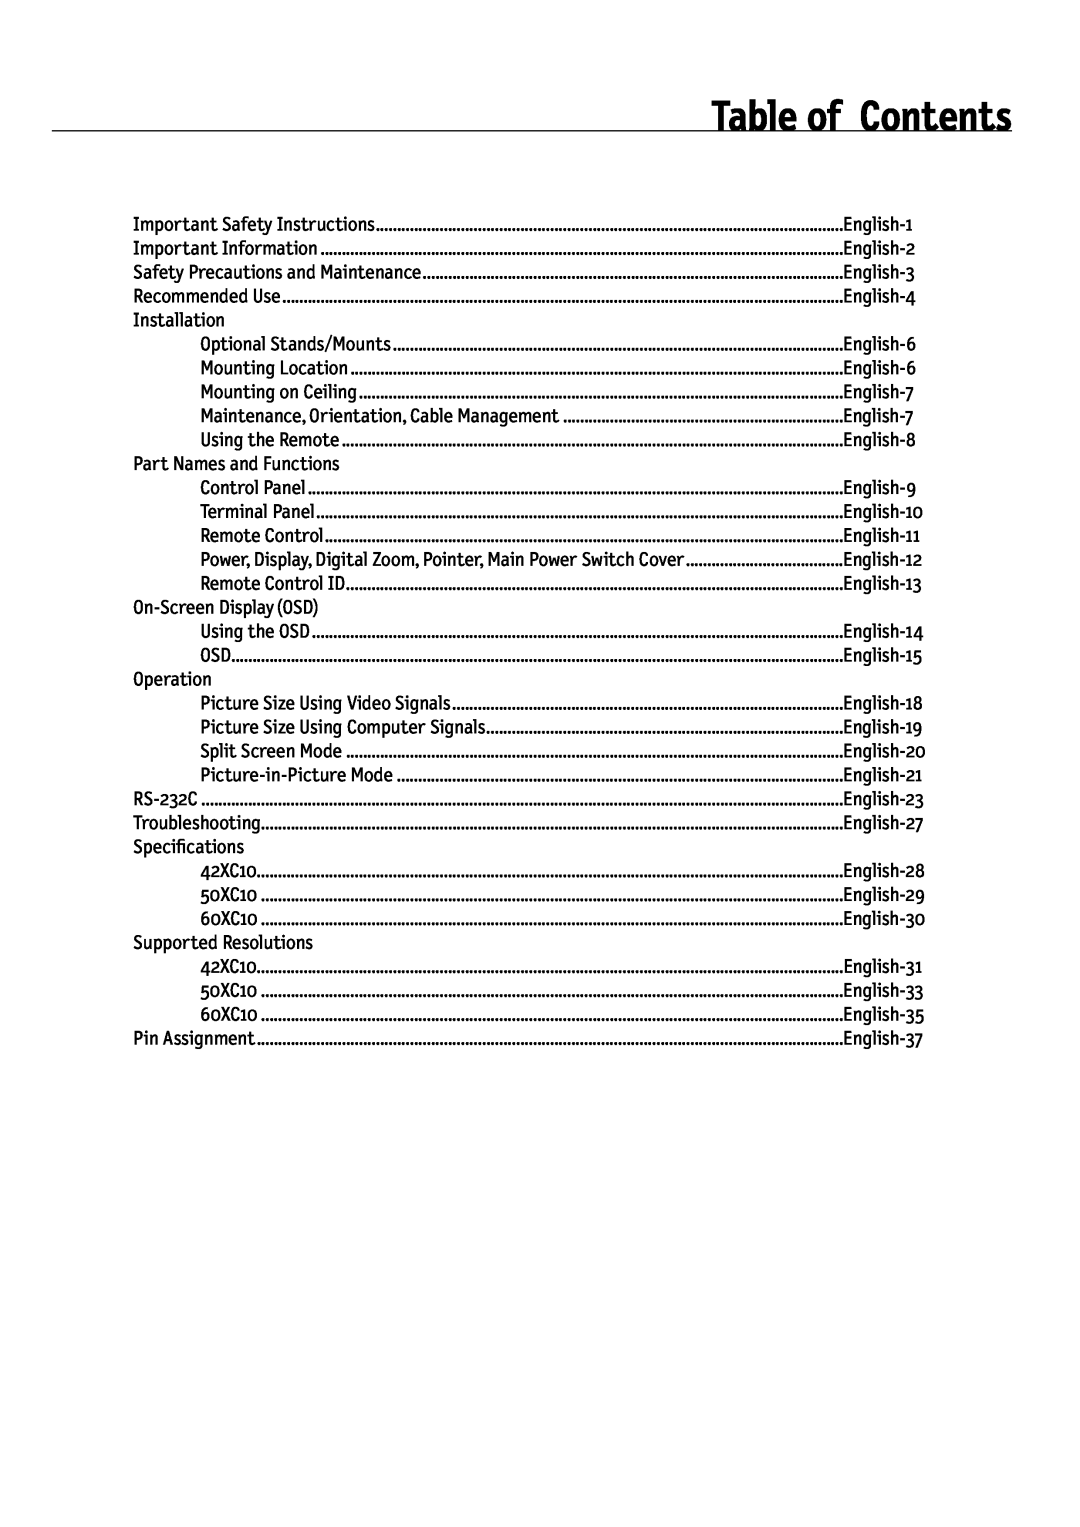 NEC 50XC10, 60XC10, 42XC10 user manual Table of Contents 